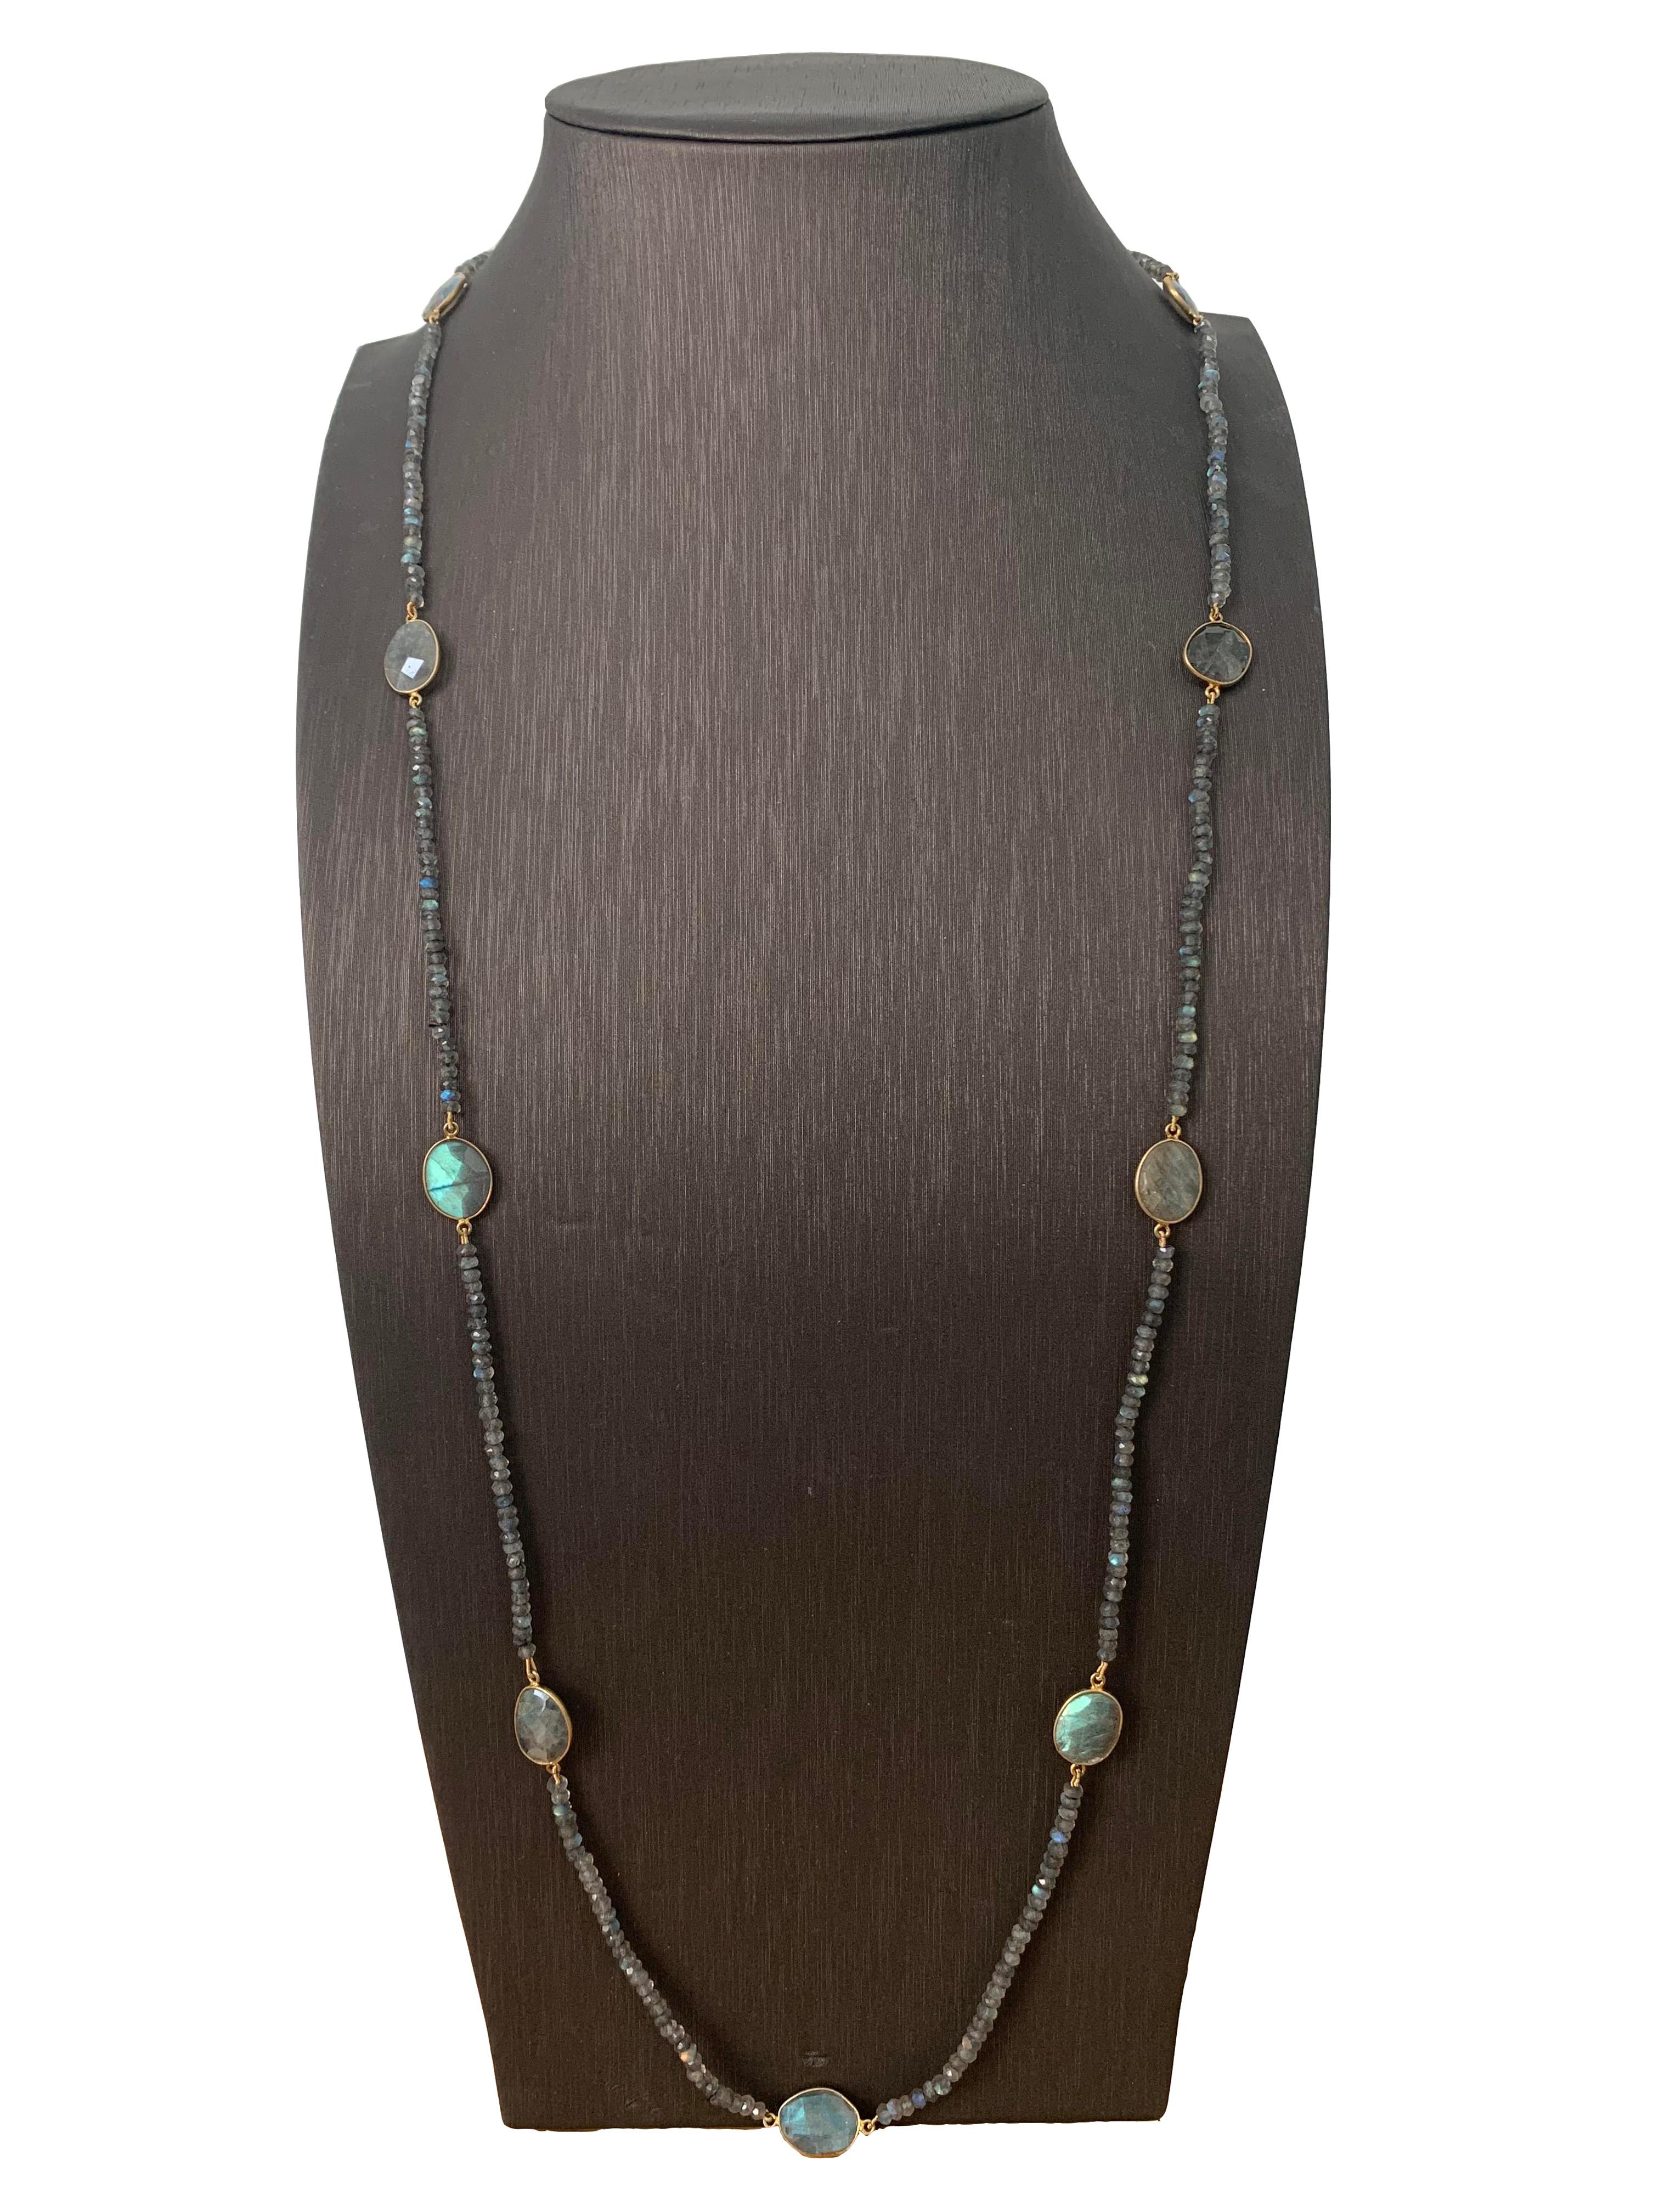 Beautiful bezel set rose cut Labradolite station necklace strung roundel Labradolite . 40 Inch Long. The setting and clasp are vermeil.

The entire necklace has beautiful rainbow iridescent, a unique feature of the stones. Can be worn long, double